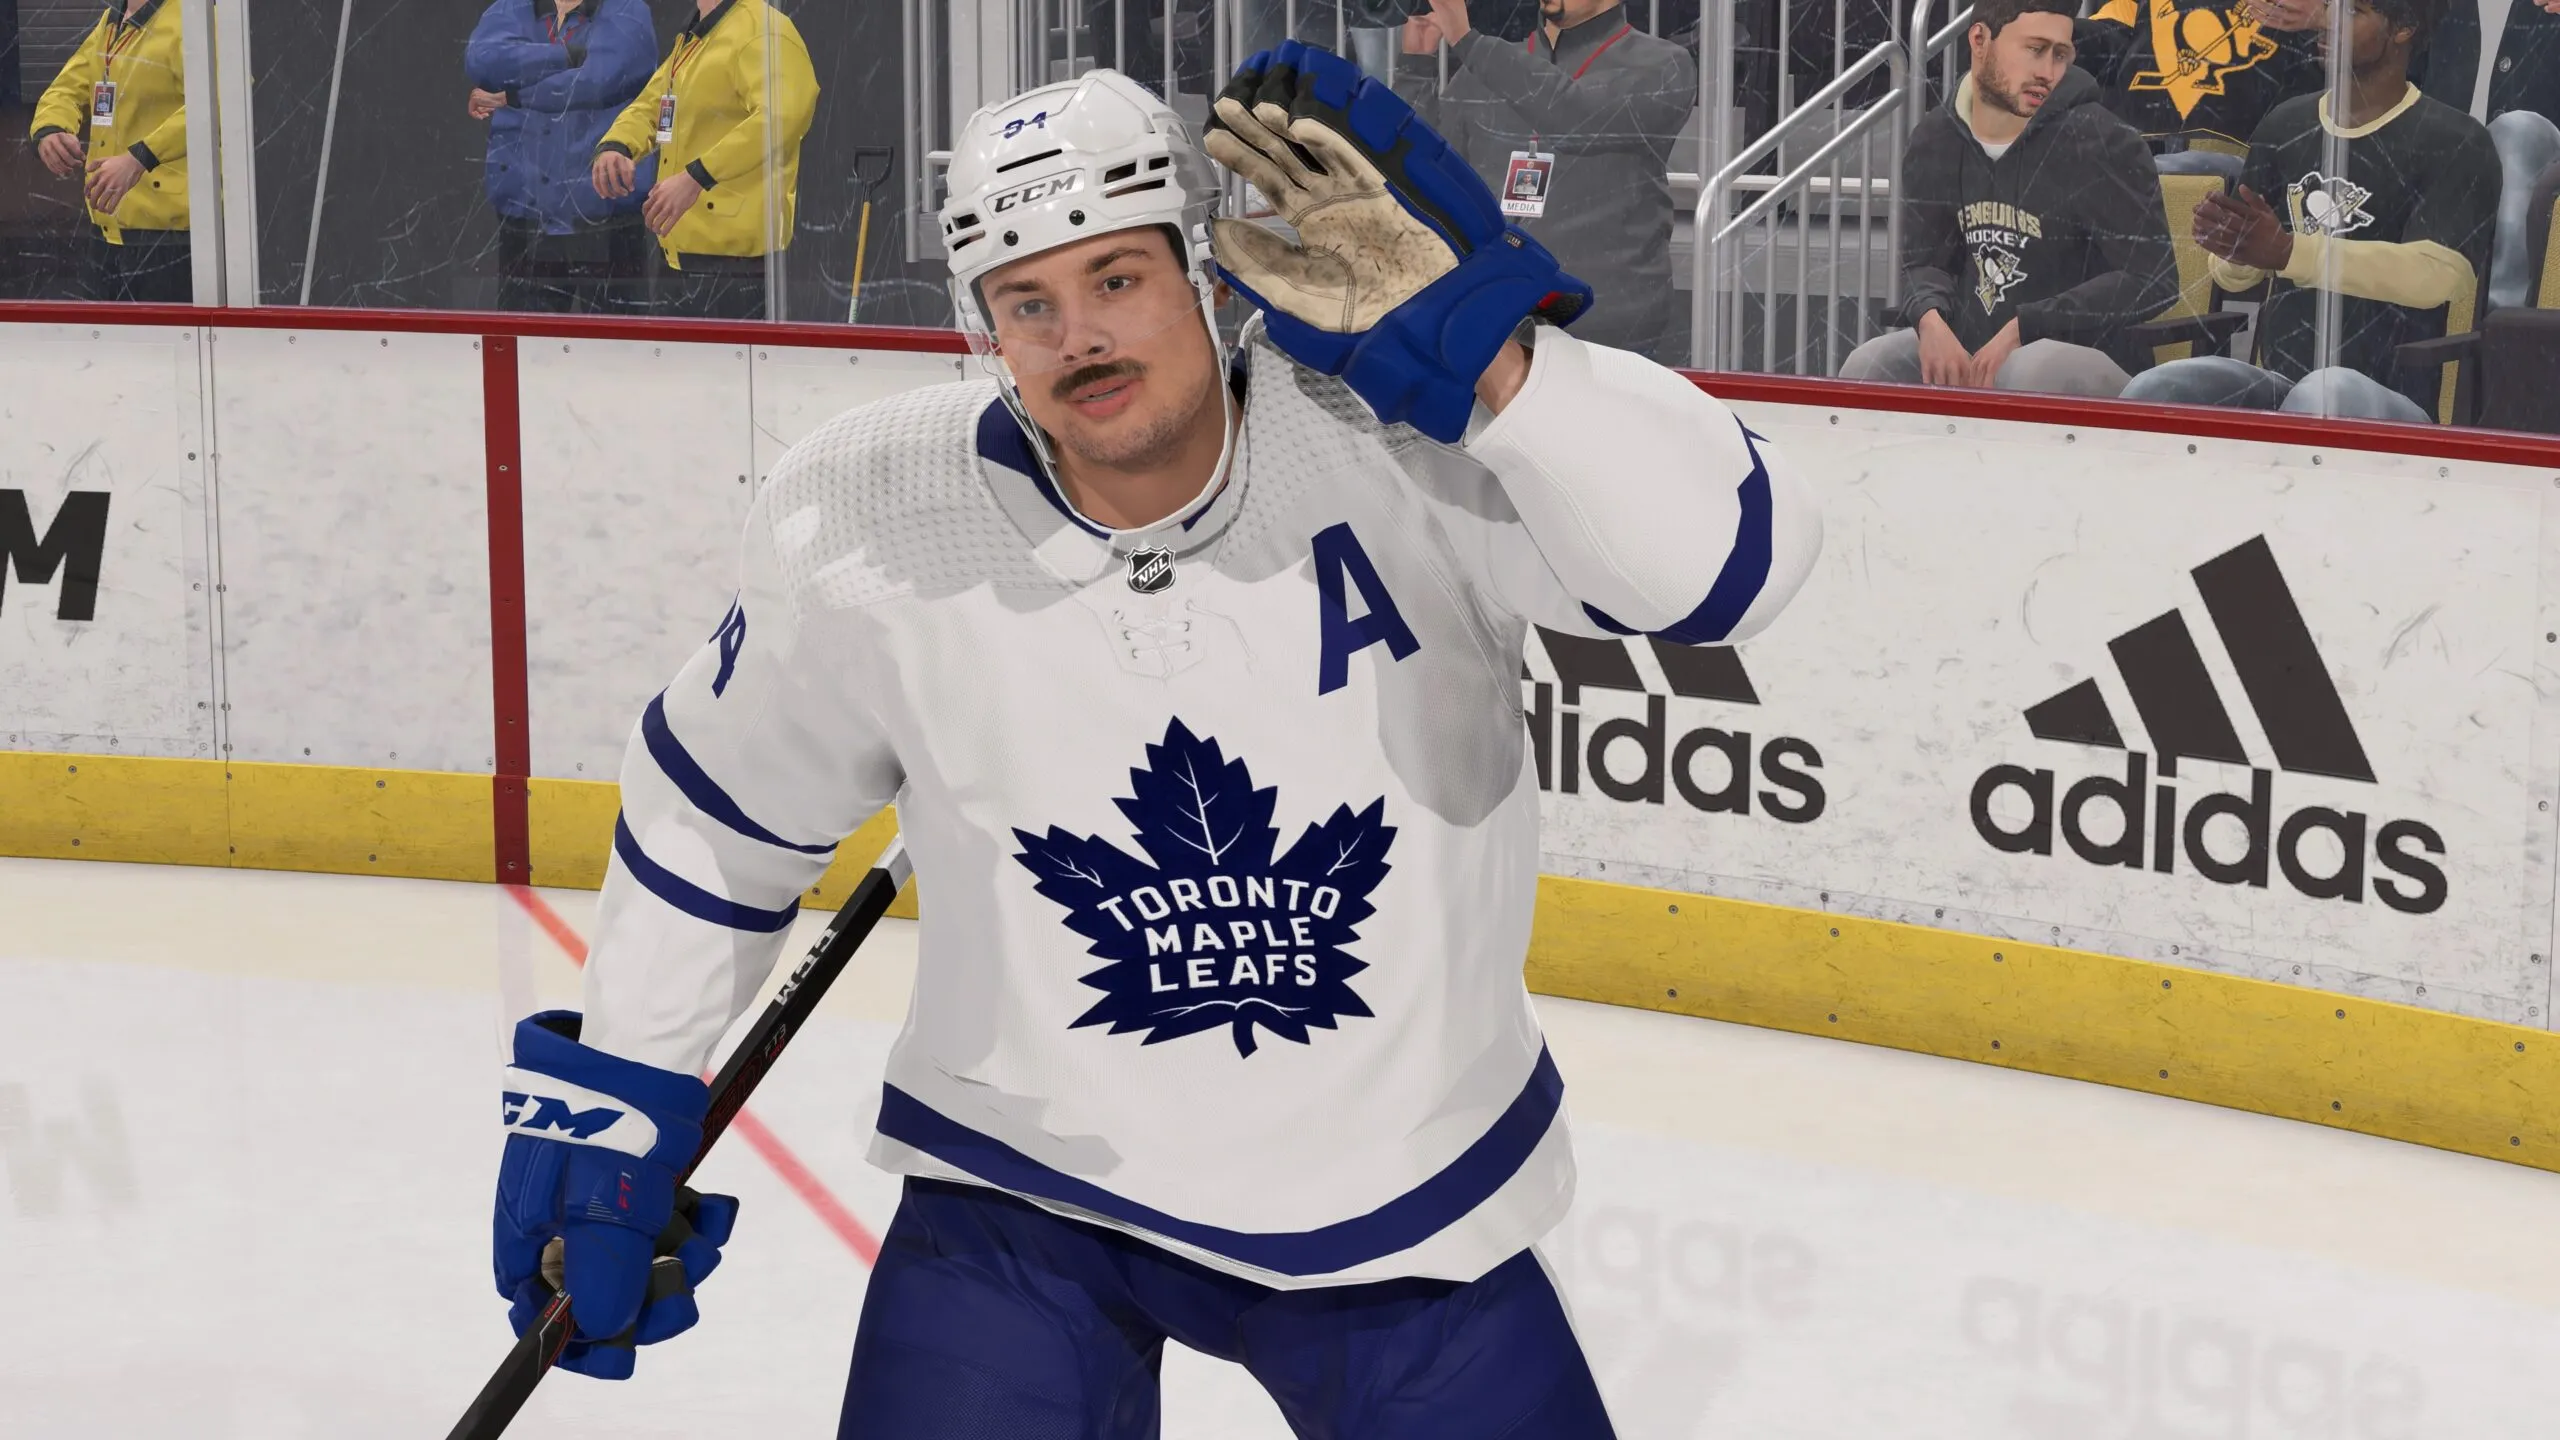 10 HUT Uniforms to Consider Wearing in NHL 22 - Operation Sports